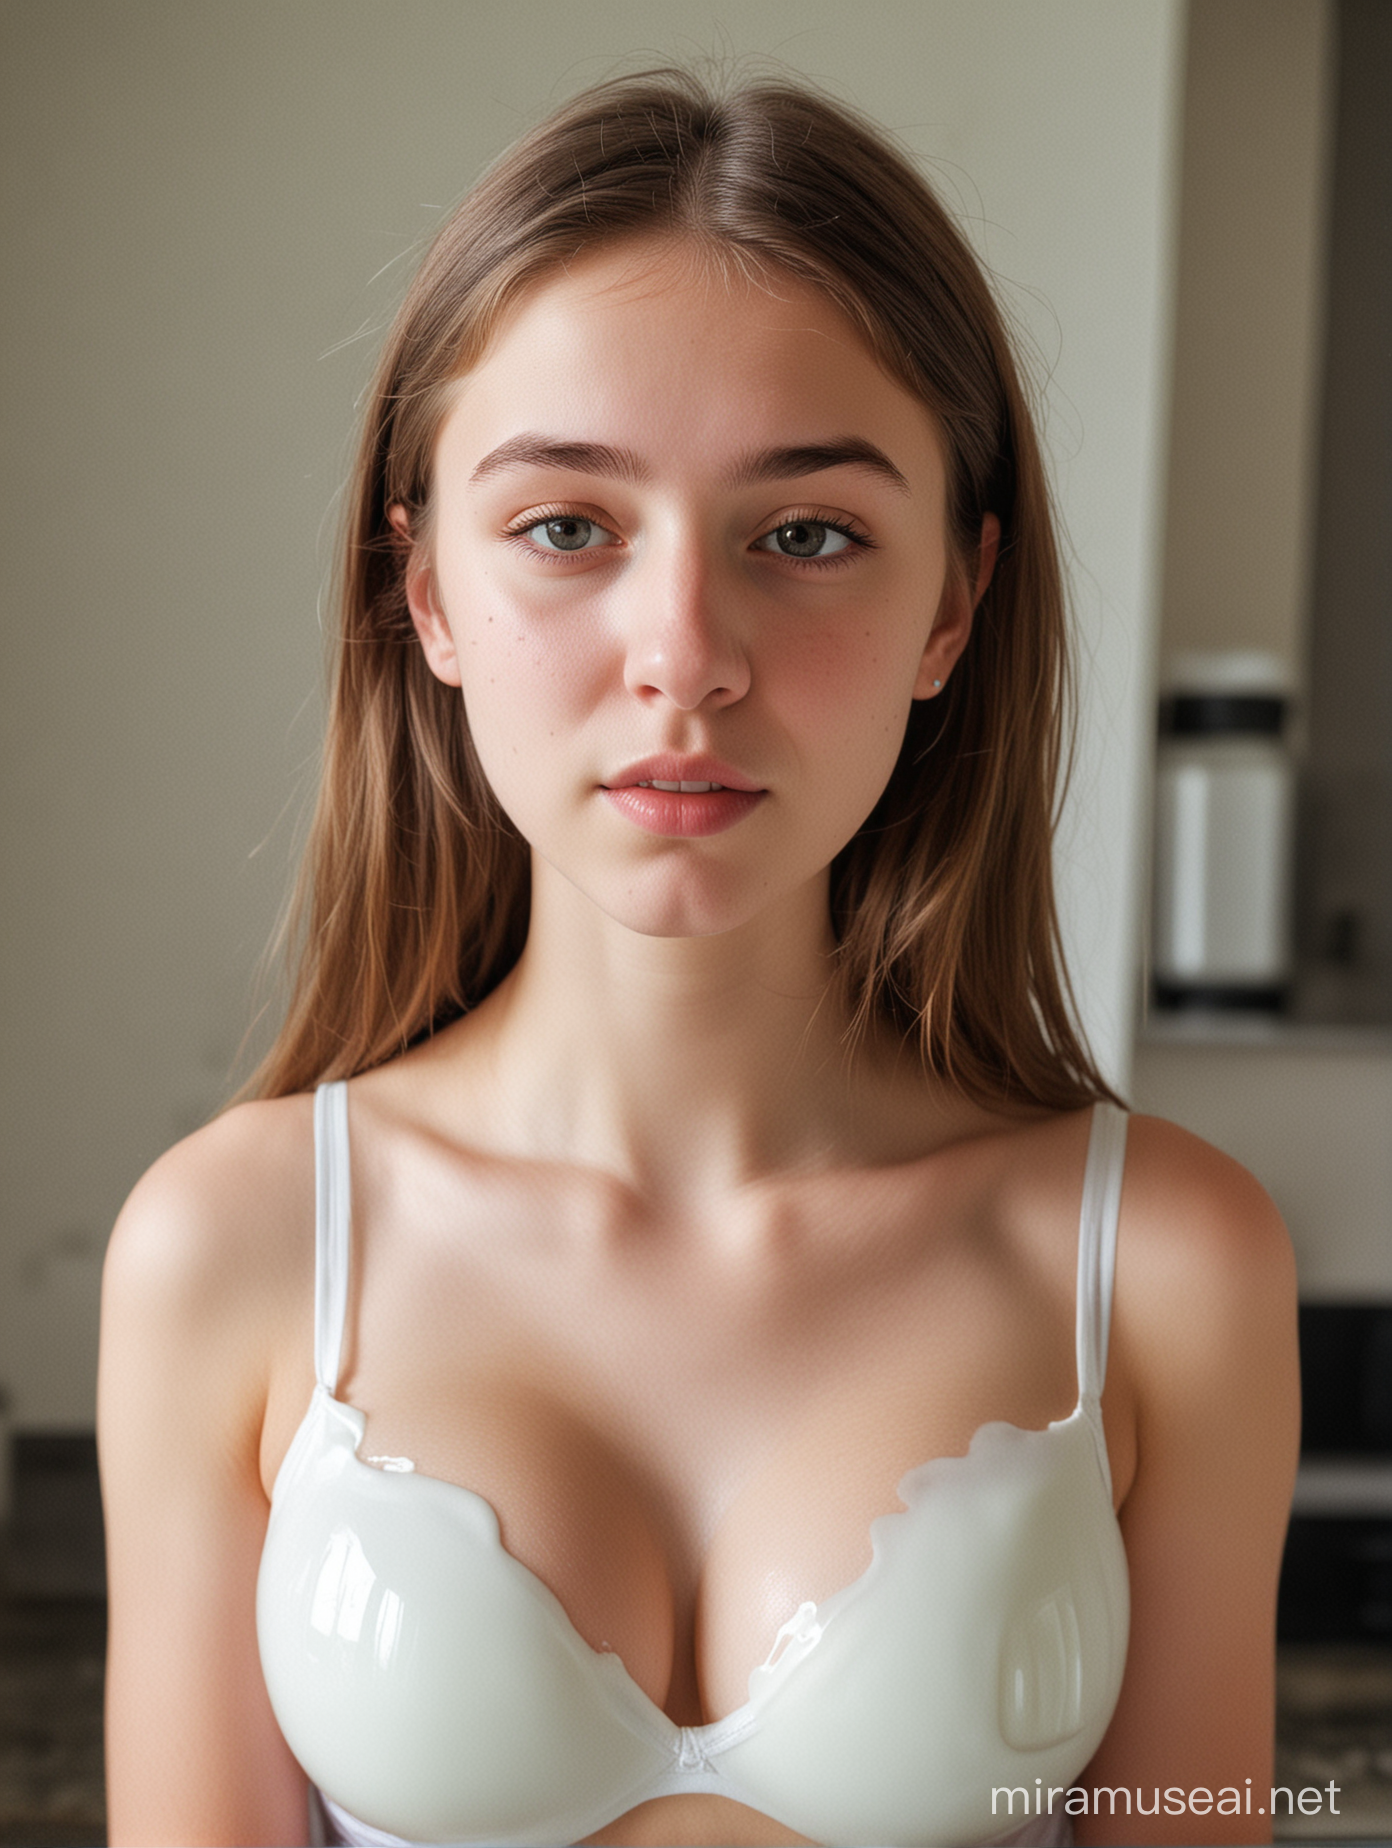 Teen Girl with Spilled Milk on Cleavage in Kitchen Mishap